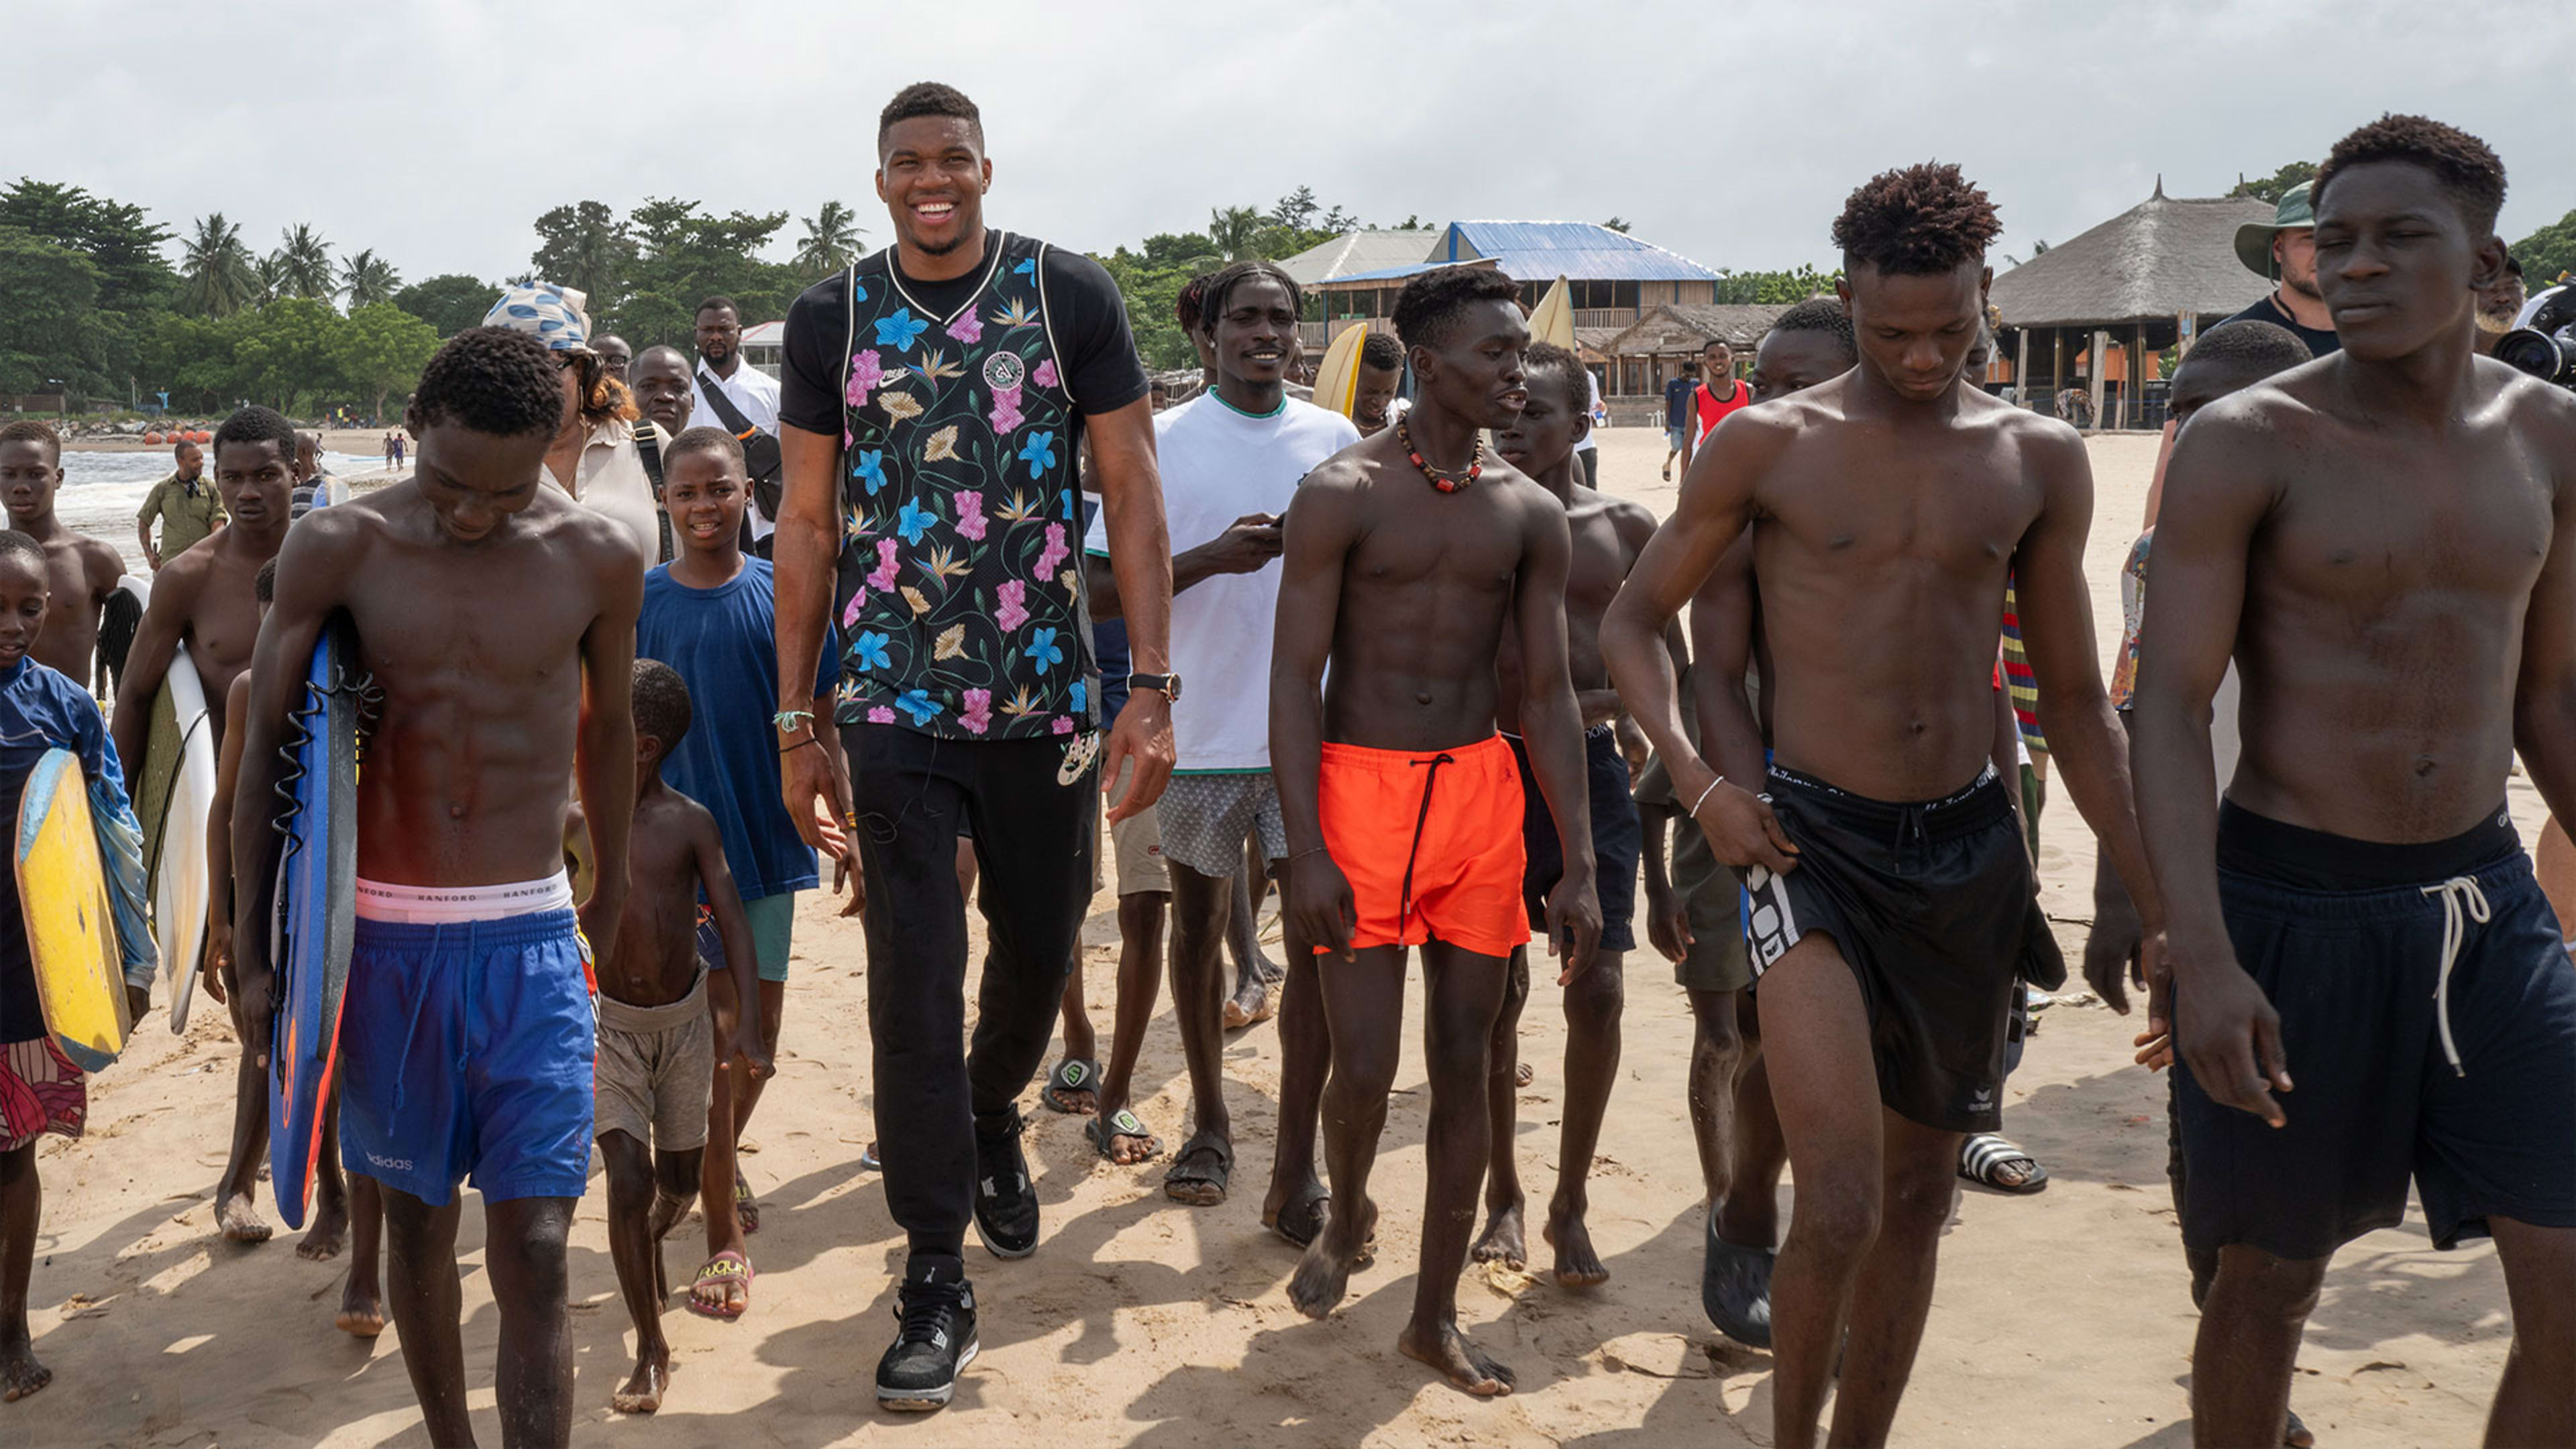 Giannis Antetokounmpo goes back to Nigeria in new 30-minute WhatsApp doc